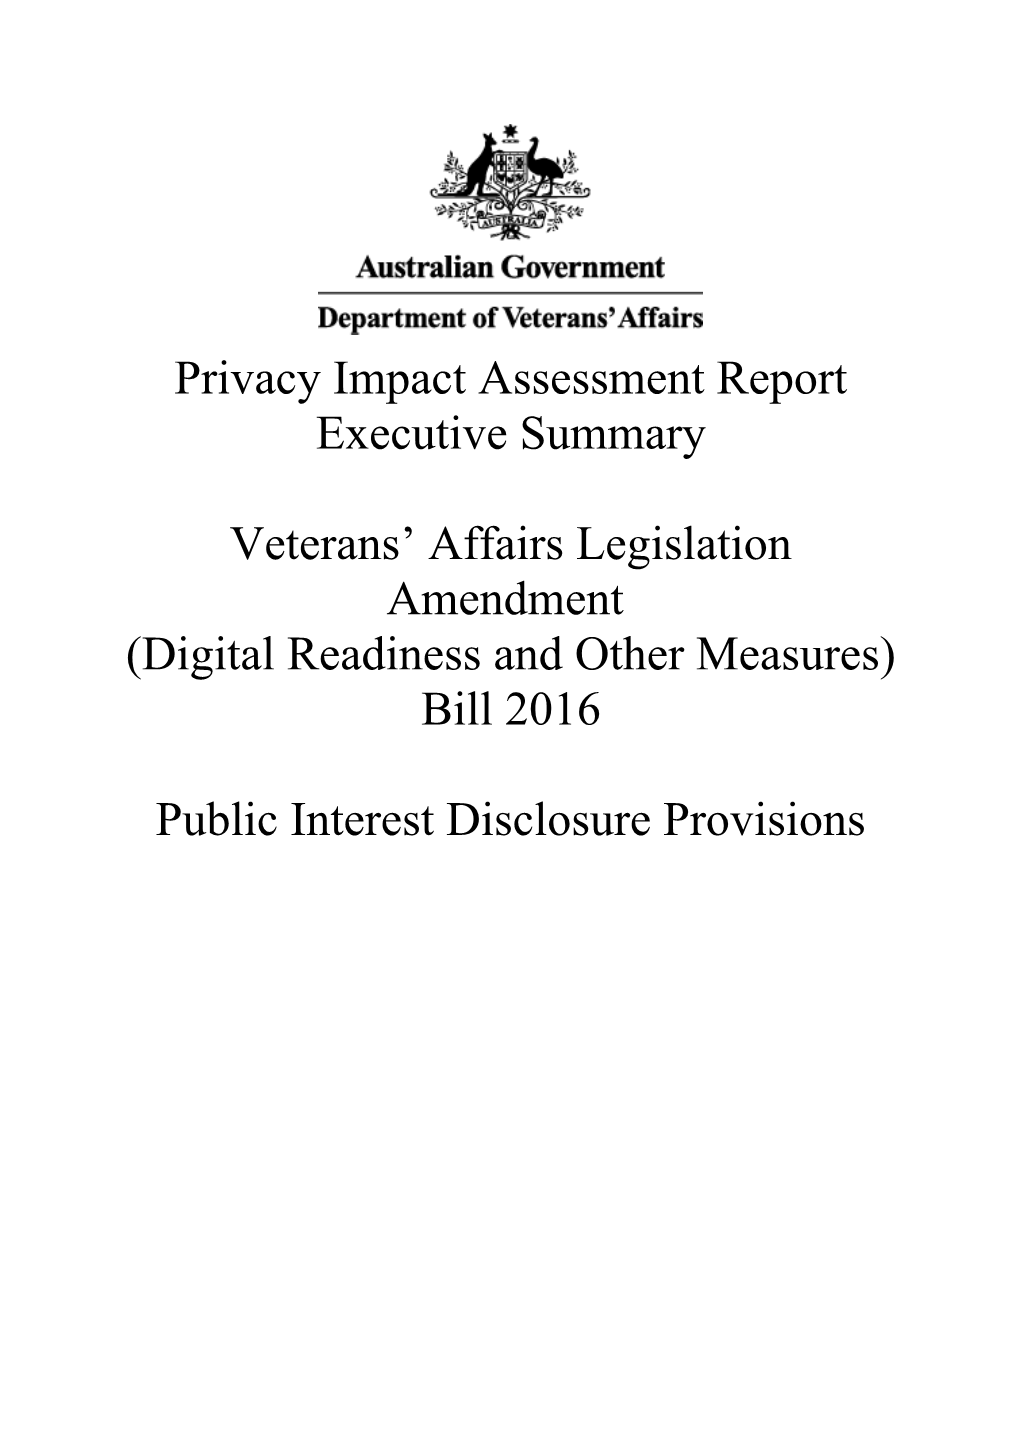 Privacy Impact Assessment Report Executive Summary